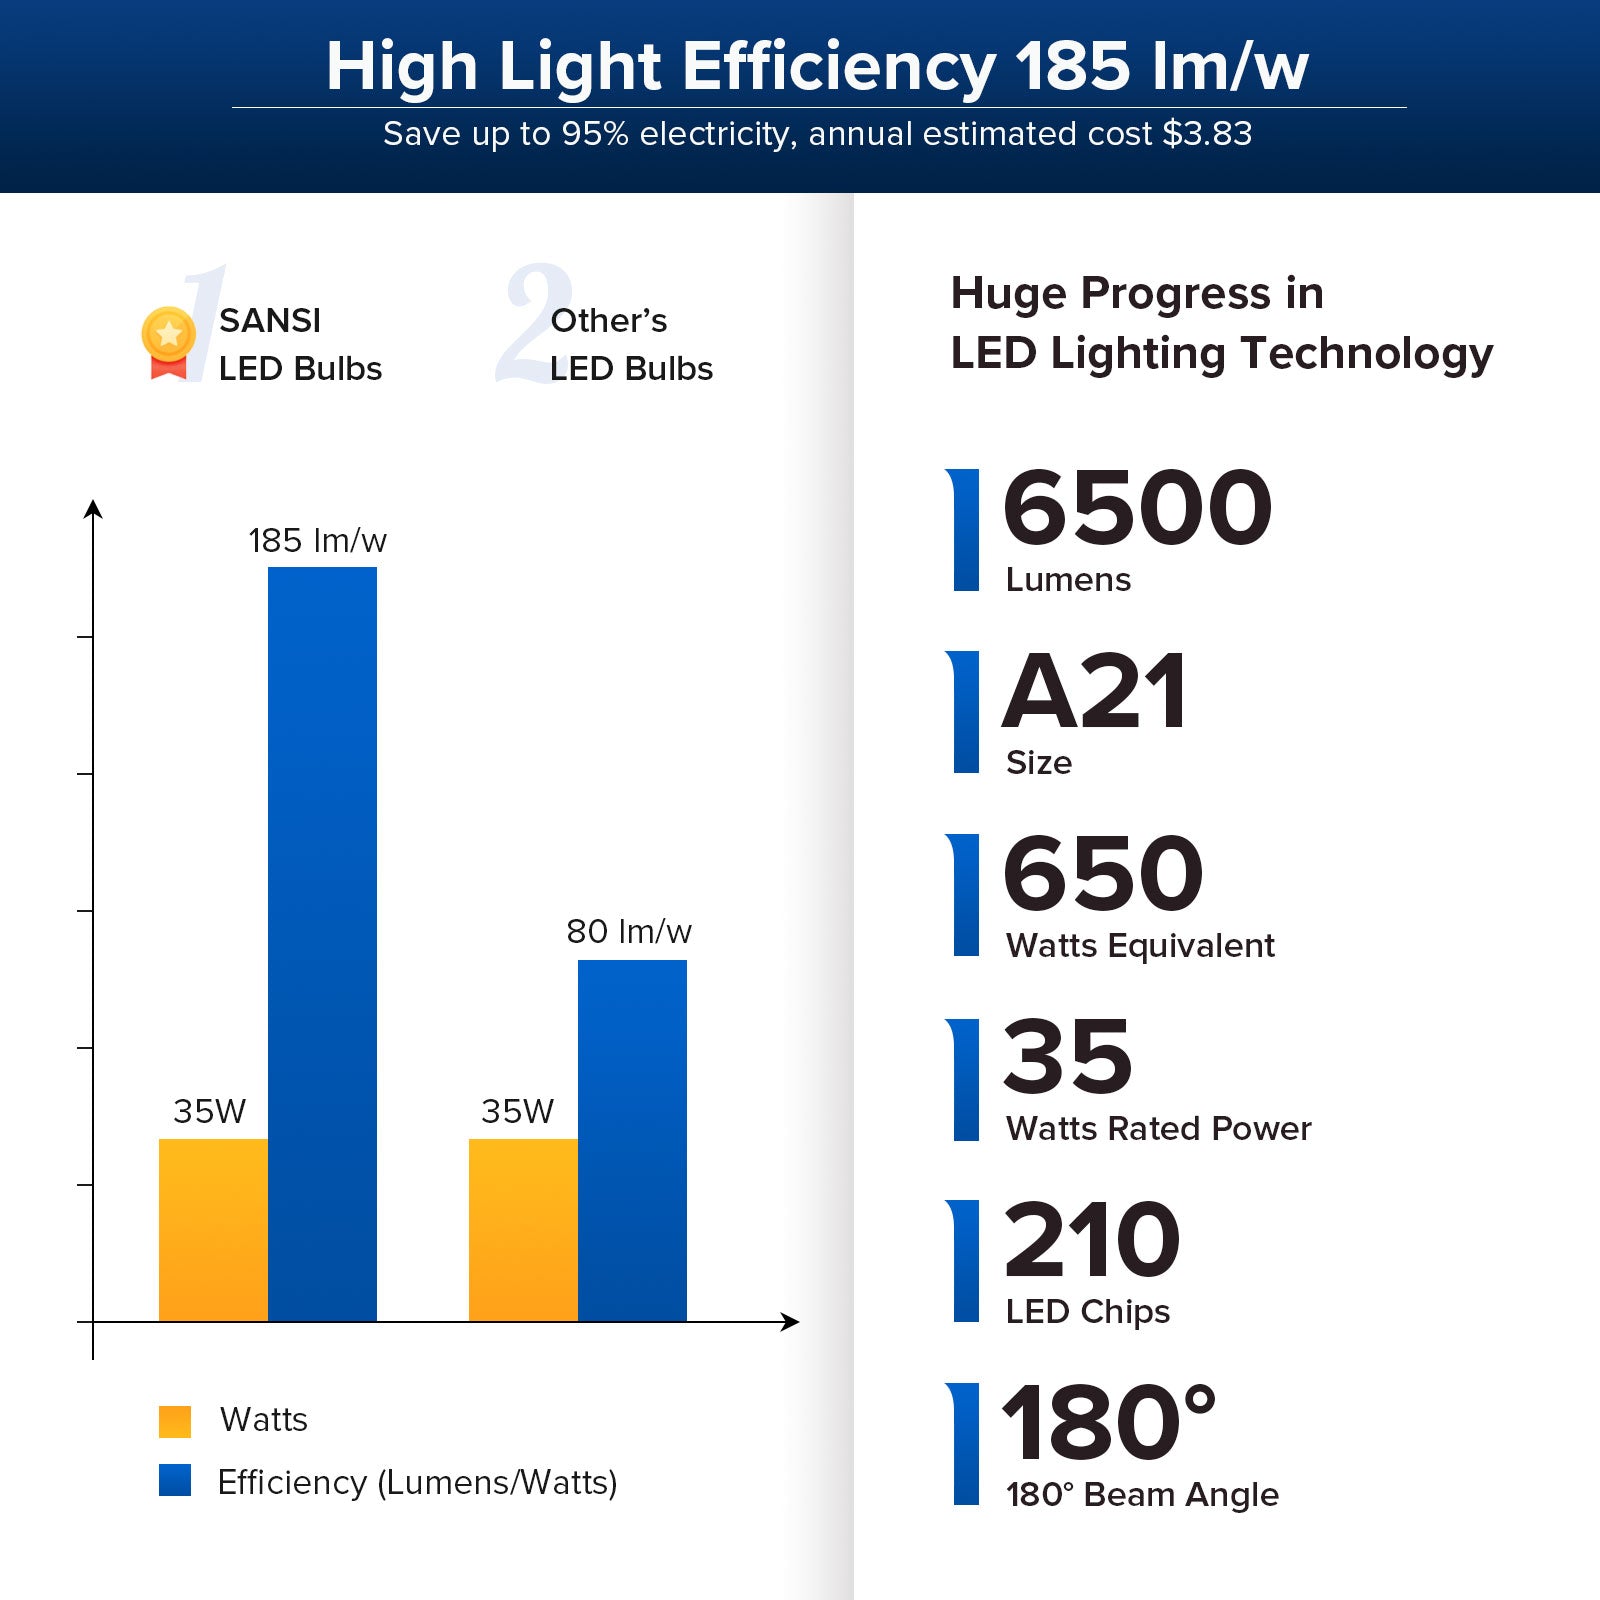 A21 35W LED Light Bulb has high light efficiency 185 lm/w，save up to 90% electricity, annual estimated cost $3.83.